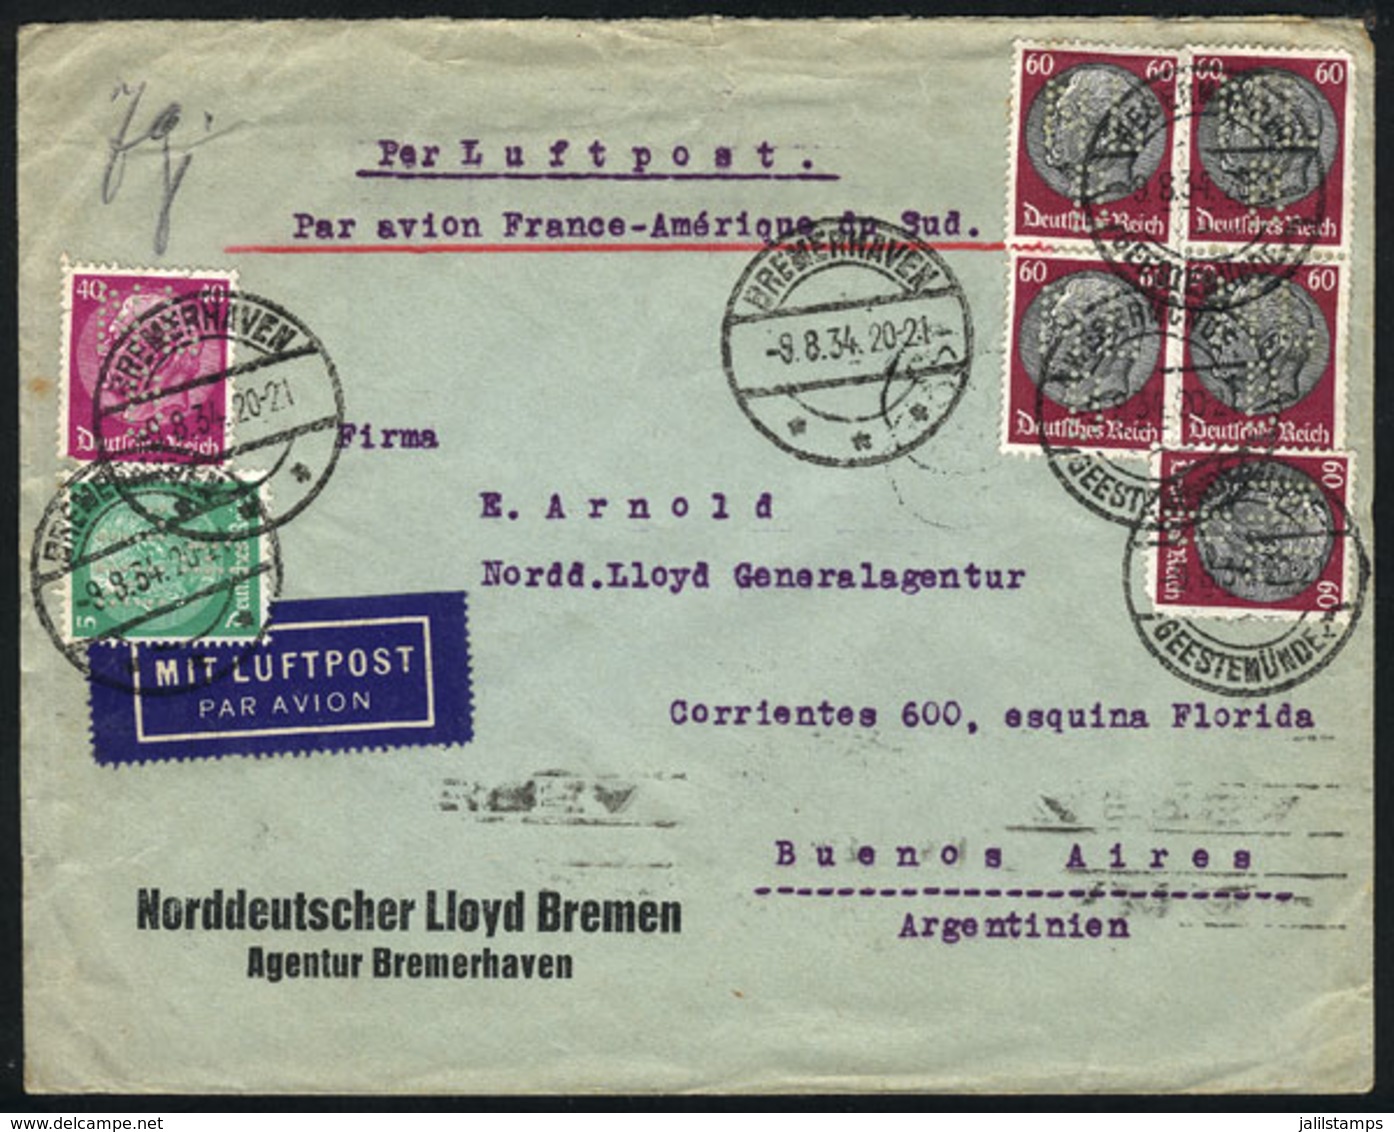 GERMANY: Airmail Cover Sent By Air France From Bremerhaven To Argentina On 9/AU/1934 Franked With 3.45Mk., All The Stamp - Préphilatélie